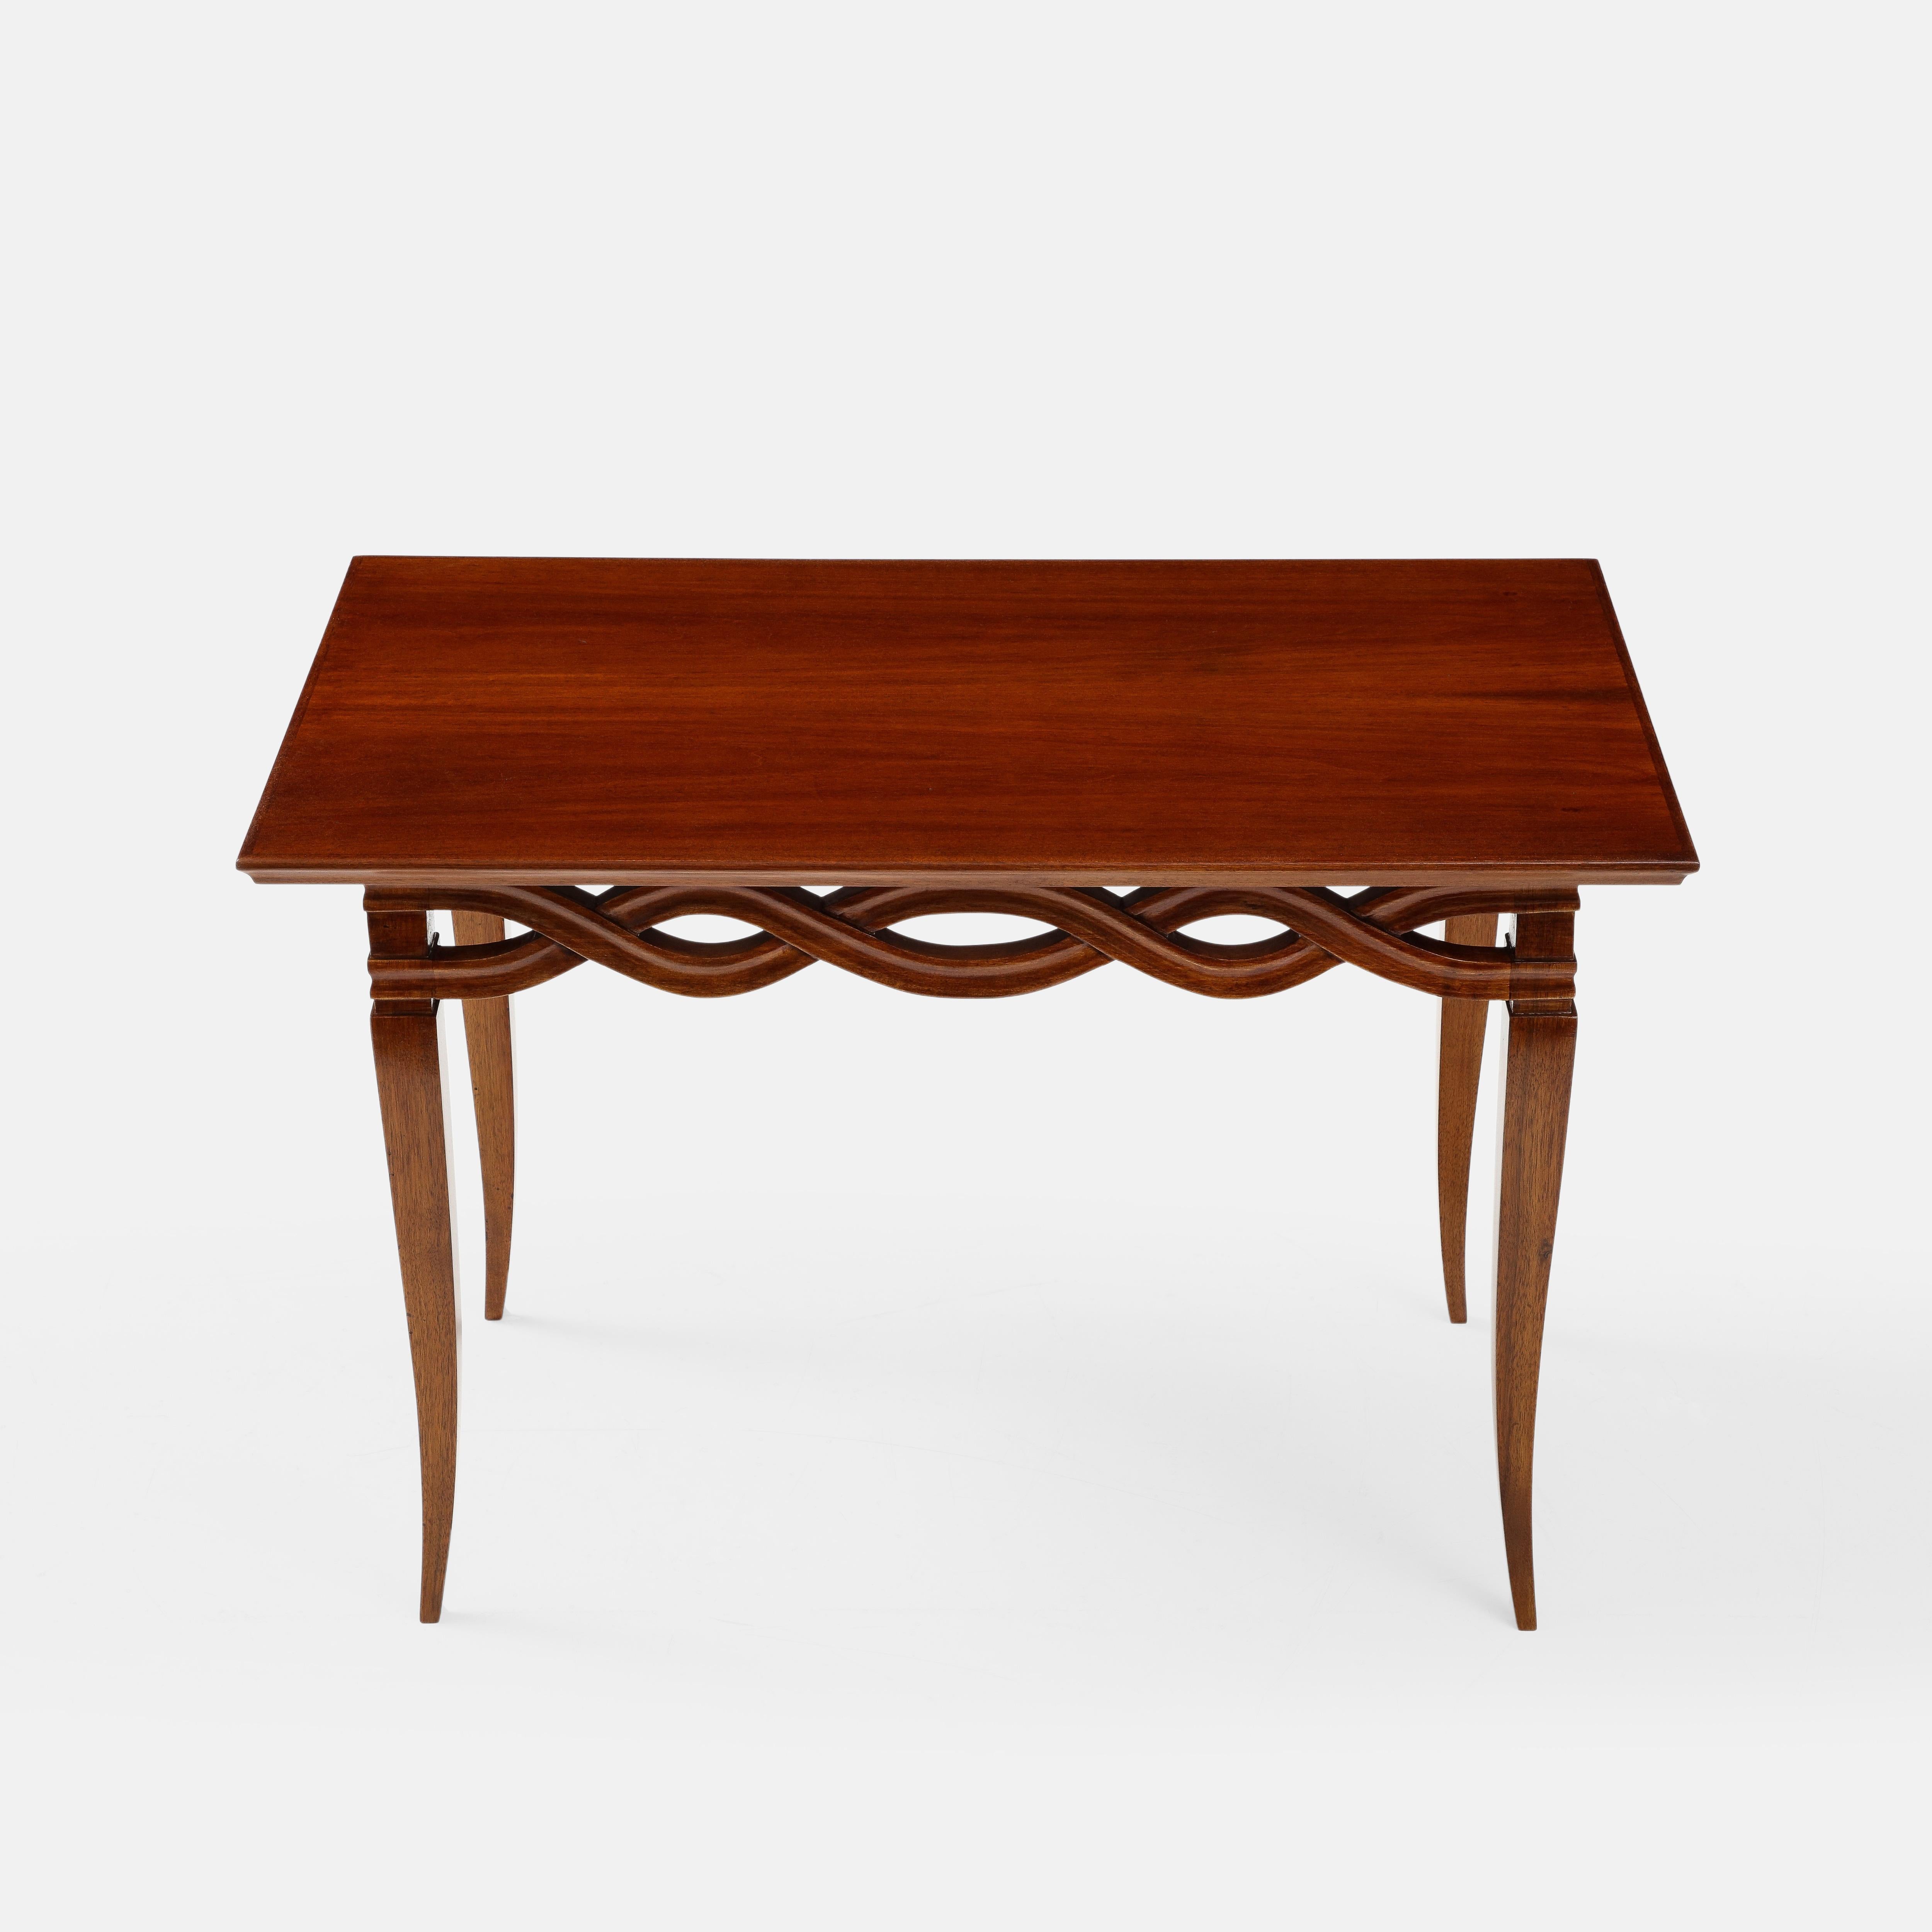 Rare Small Walnut Coffee or Side Table Attributed to Paolo Buffa, Italy, 1940s For Sale 1